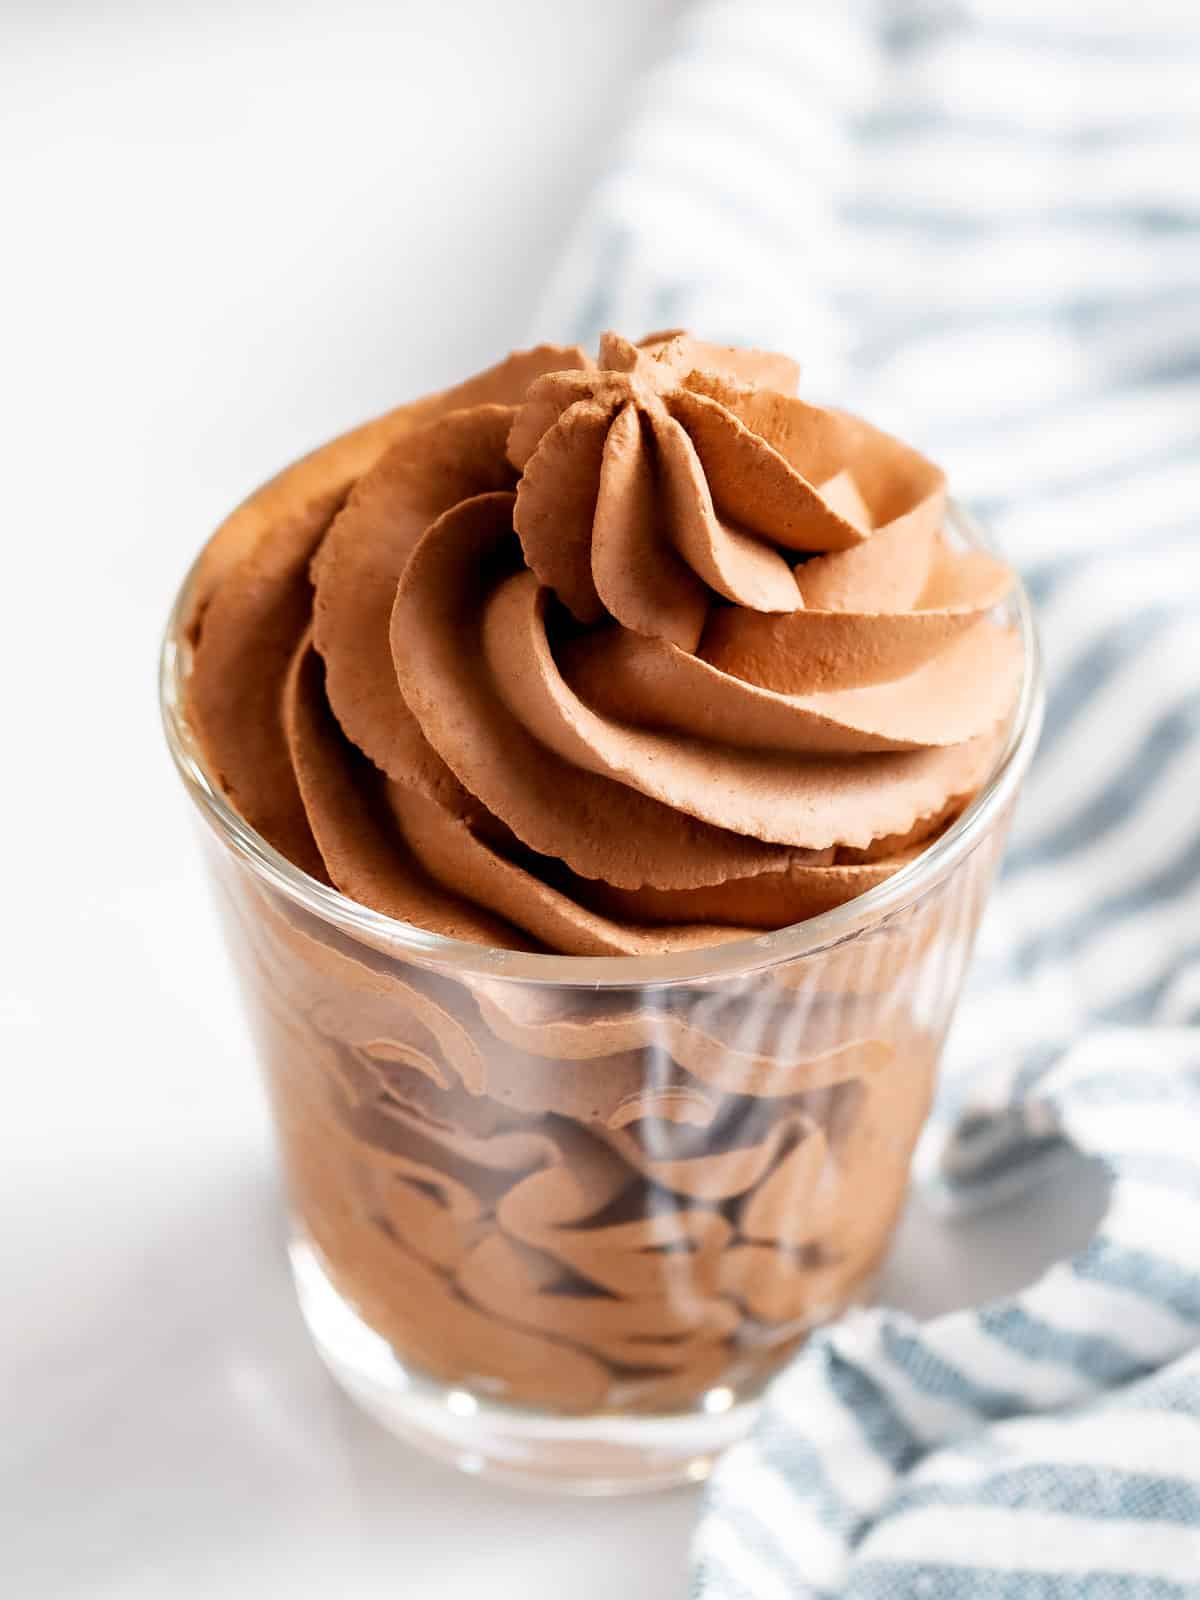 Chocolate whipped cream piped into a glass cup.